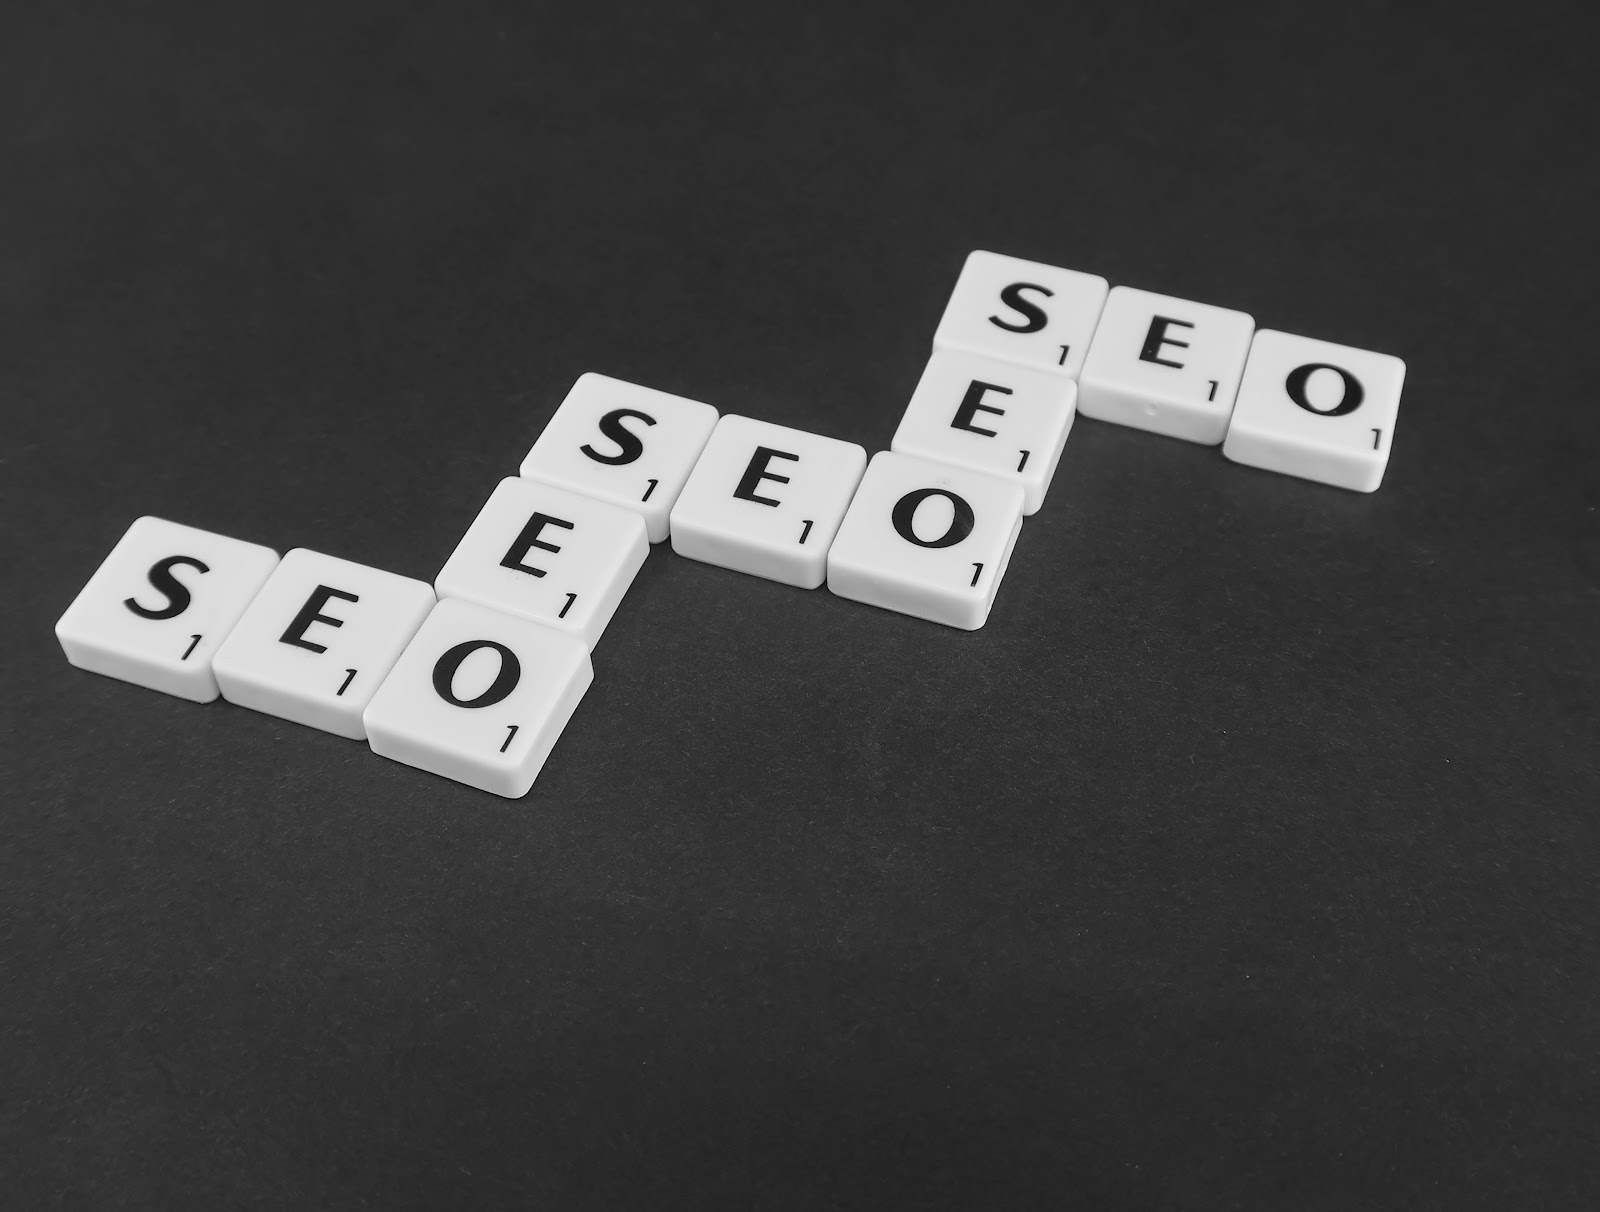 Experienced Blog Writers Help You with SEO-Friendly Content to Increase Rankings